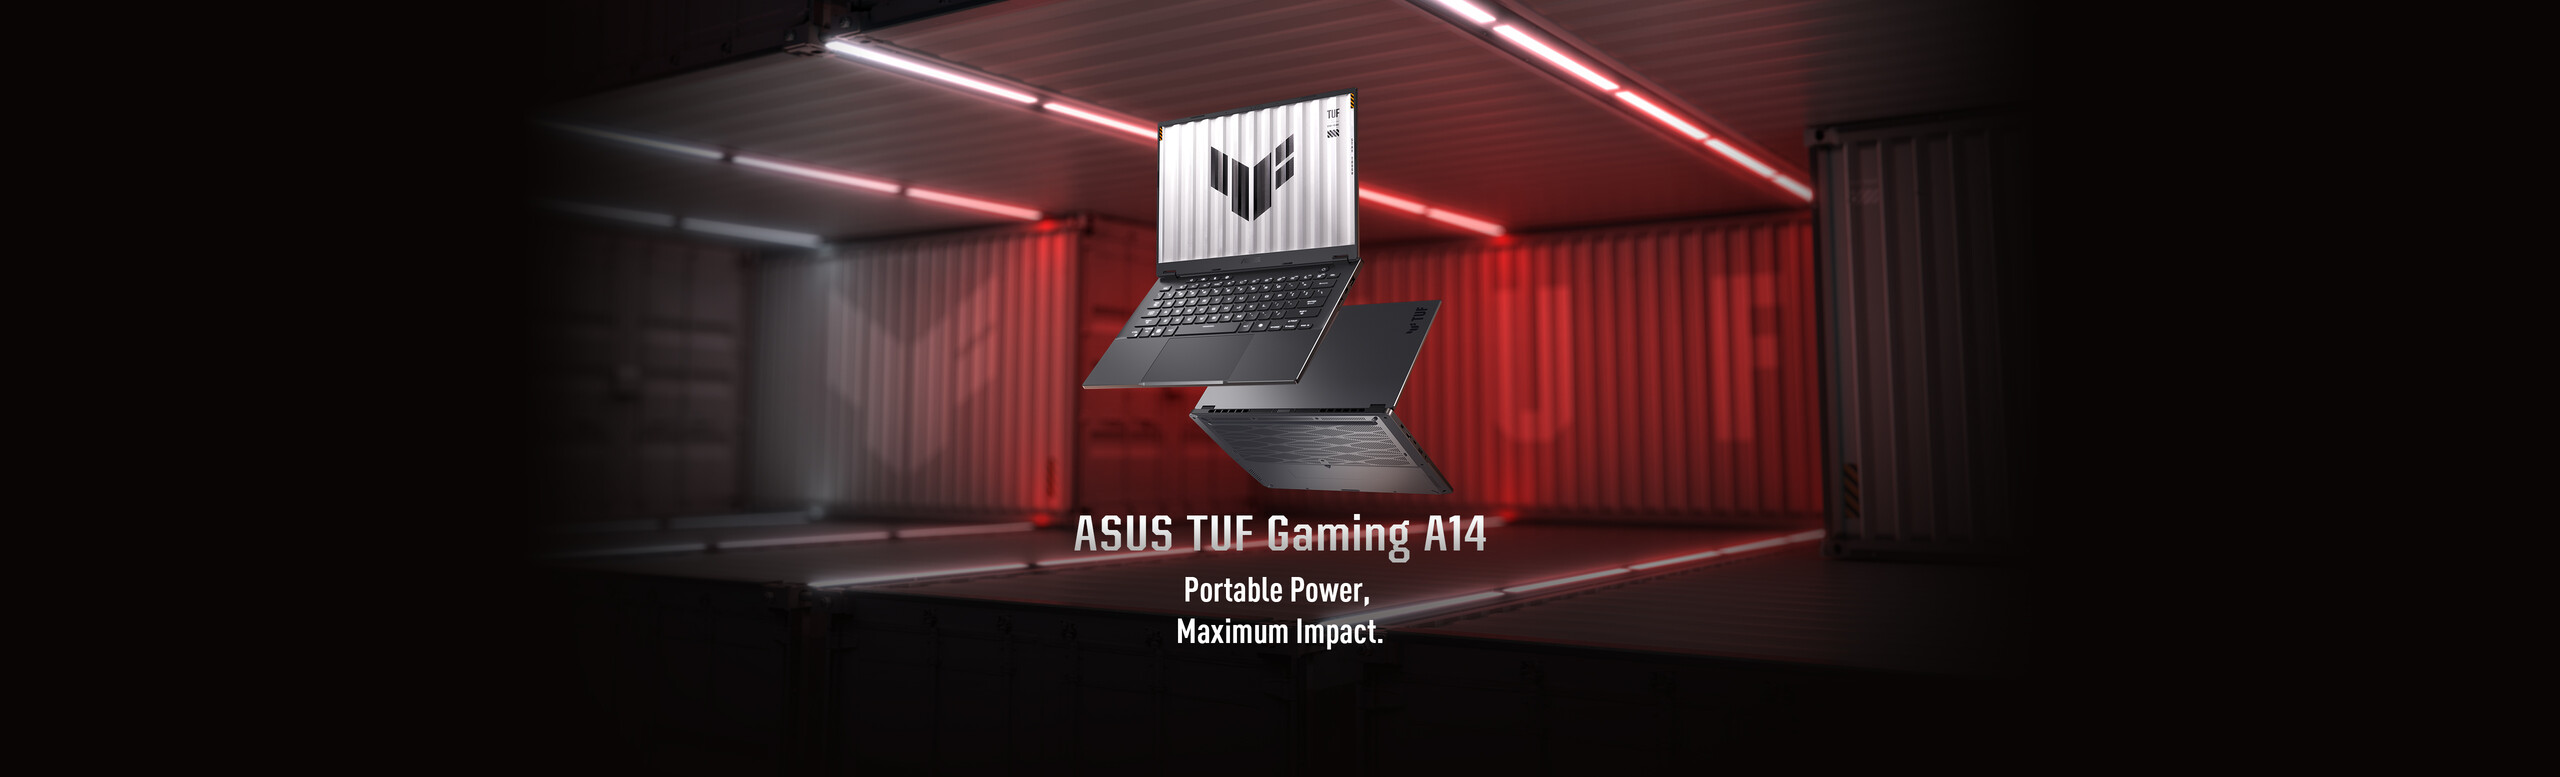 Two tuf gaming a14 open views with text "Portable Power, Maximum Impact"